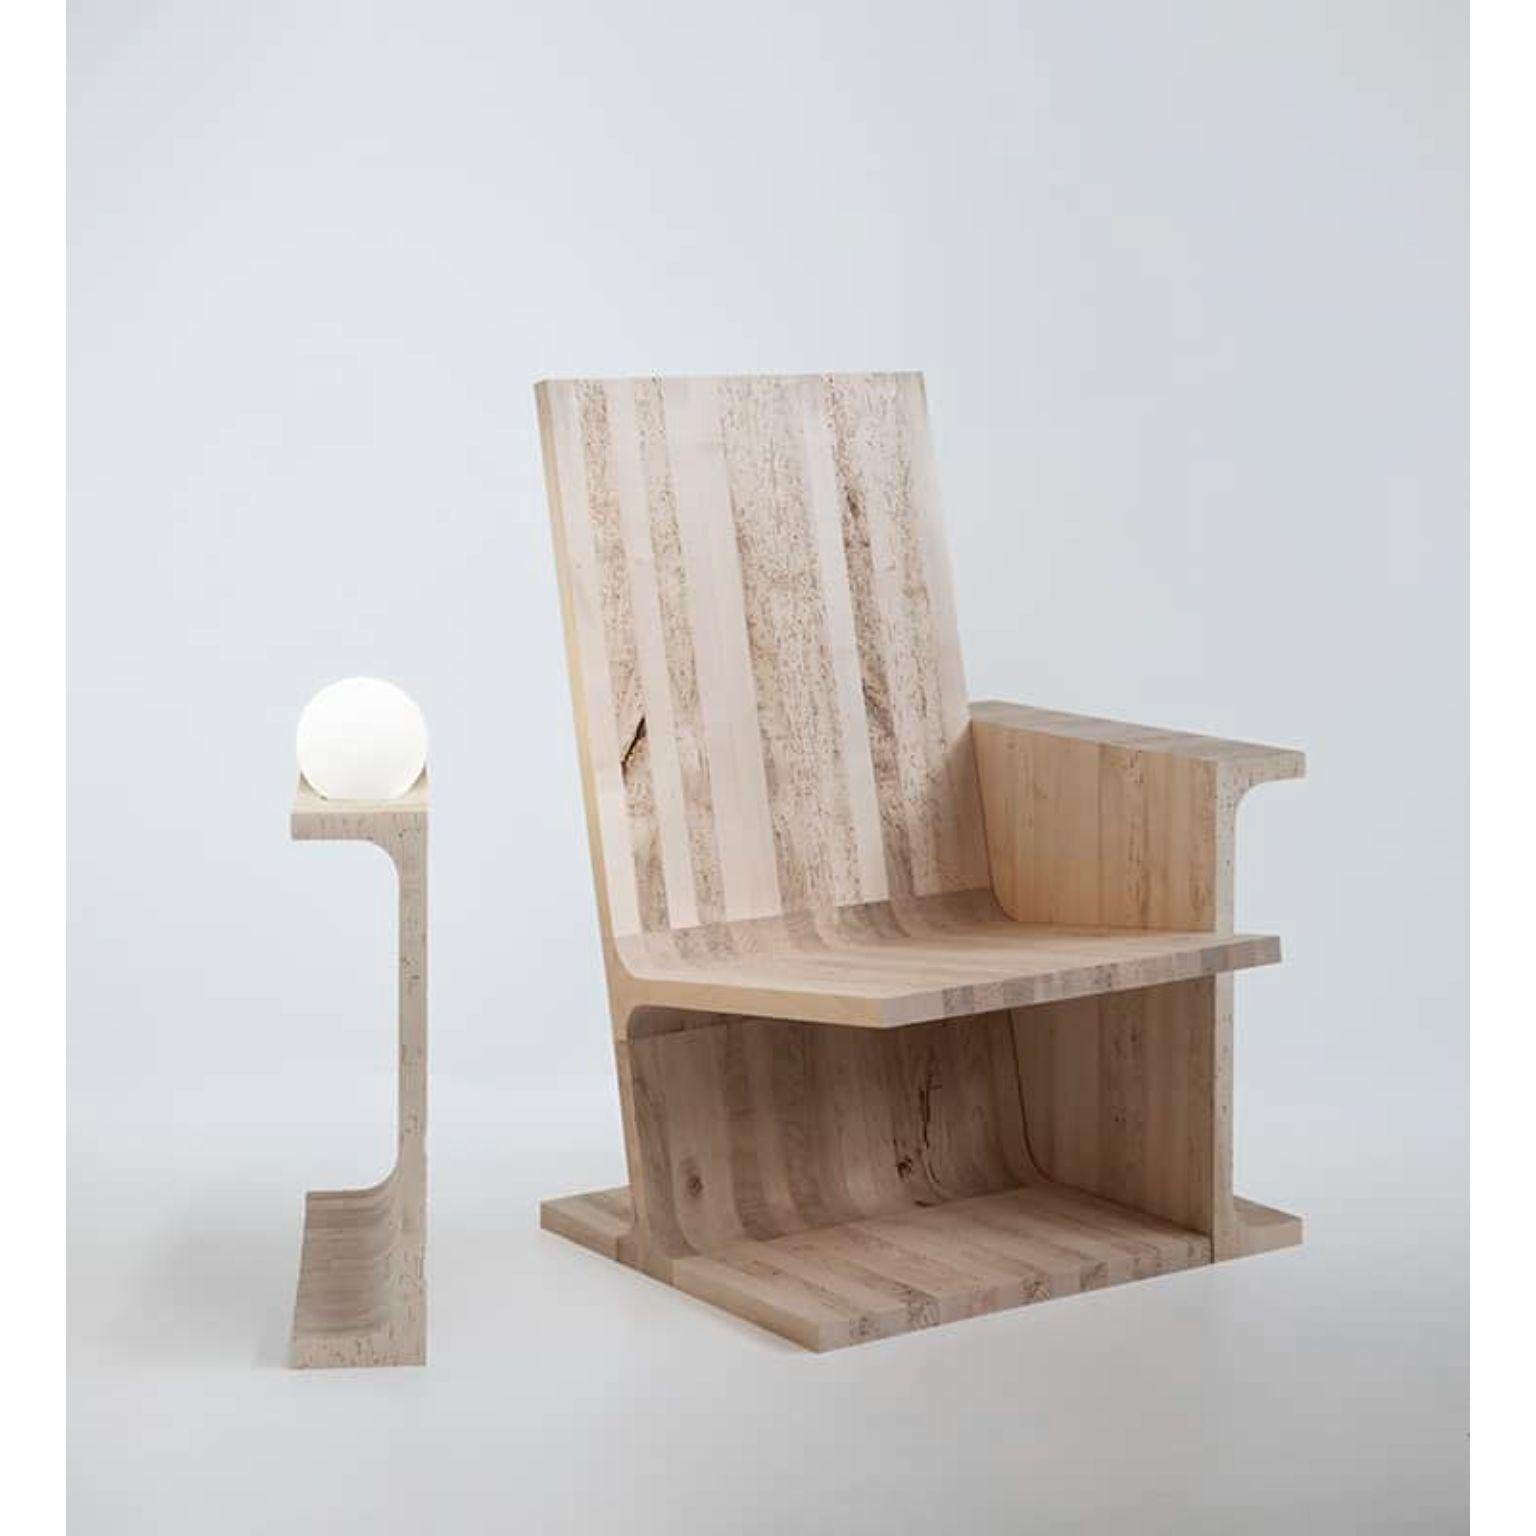 Set Of 2 Book Room Chair And Arm With Lamp by Secondome Edizioni and Studio F
Designer: Gio Tirotto.
Dimensions: Chair: D 56 x W 70 x H 102 cm.
Arm With Lamp: D 56 x W 14 x H 58 cm.
Materials: Solid woodworm maple wood.

Collection / Production: